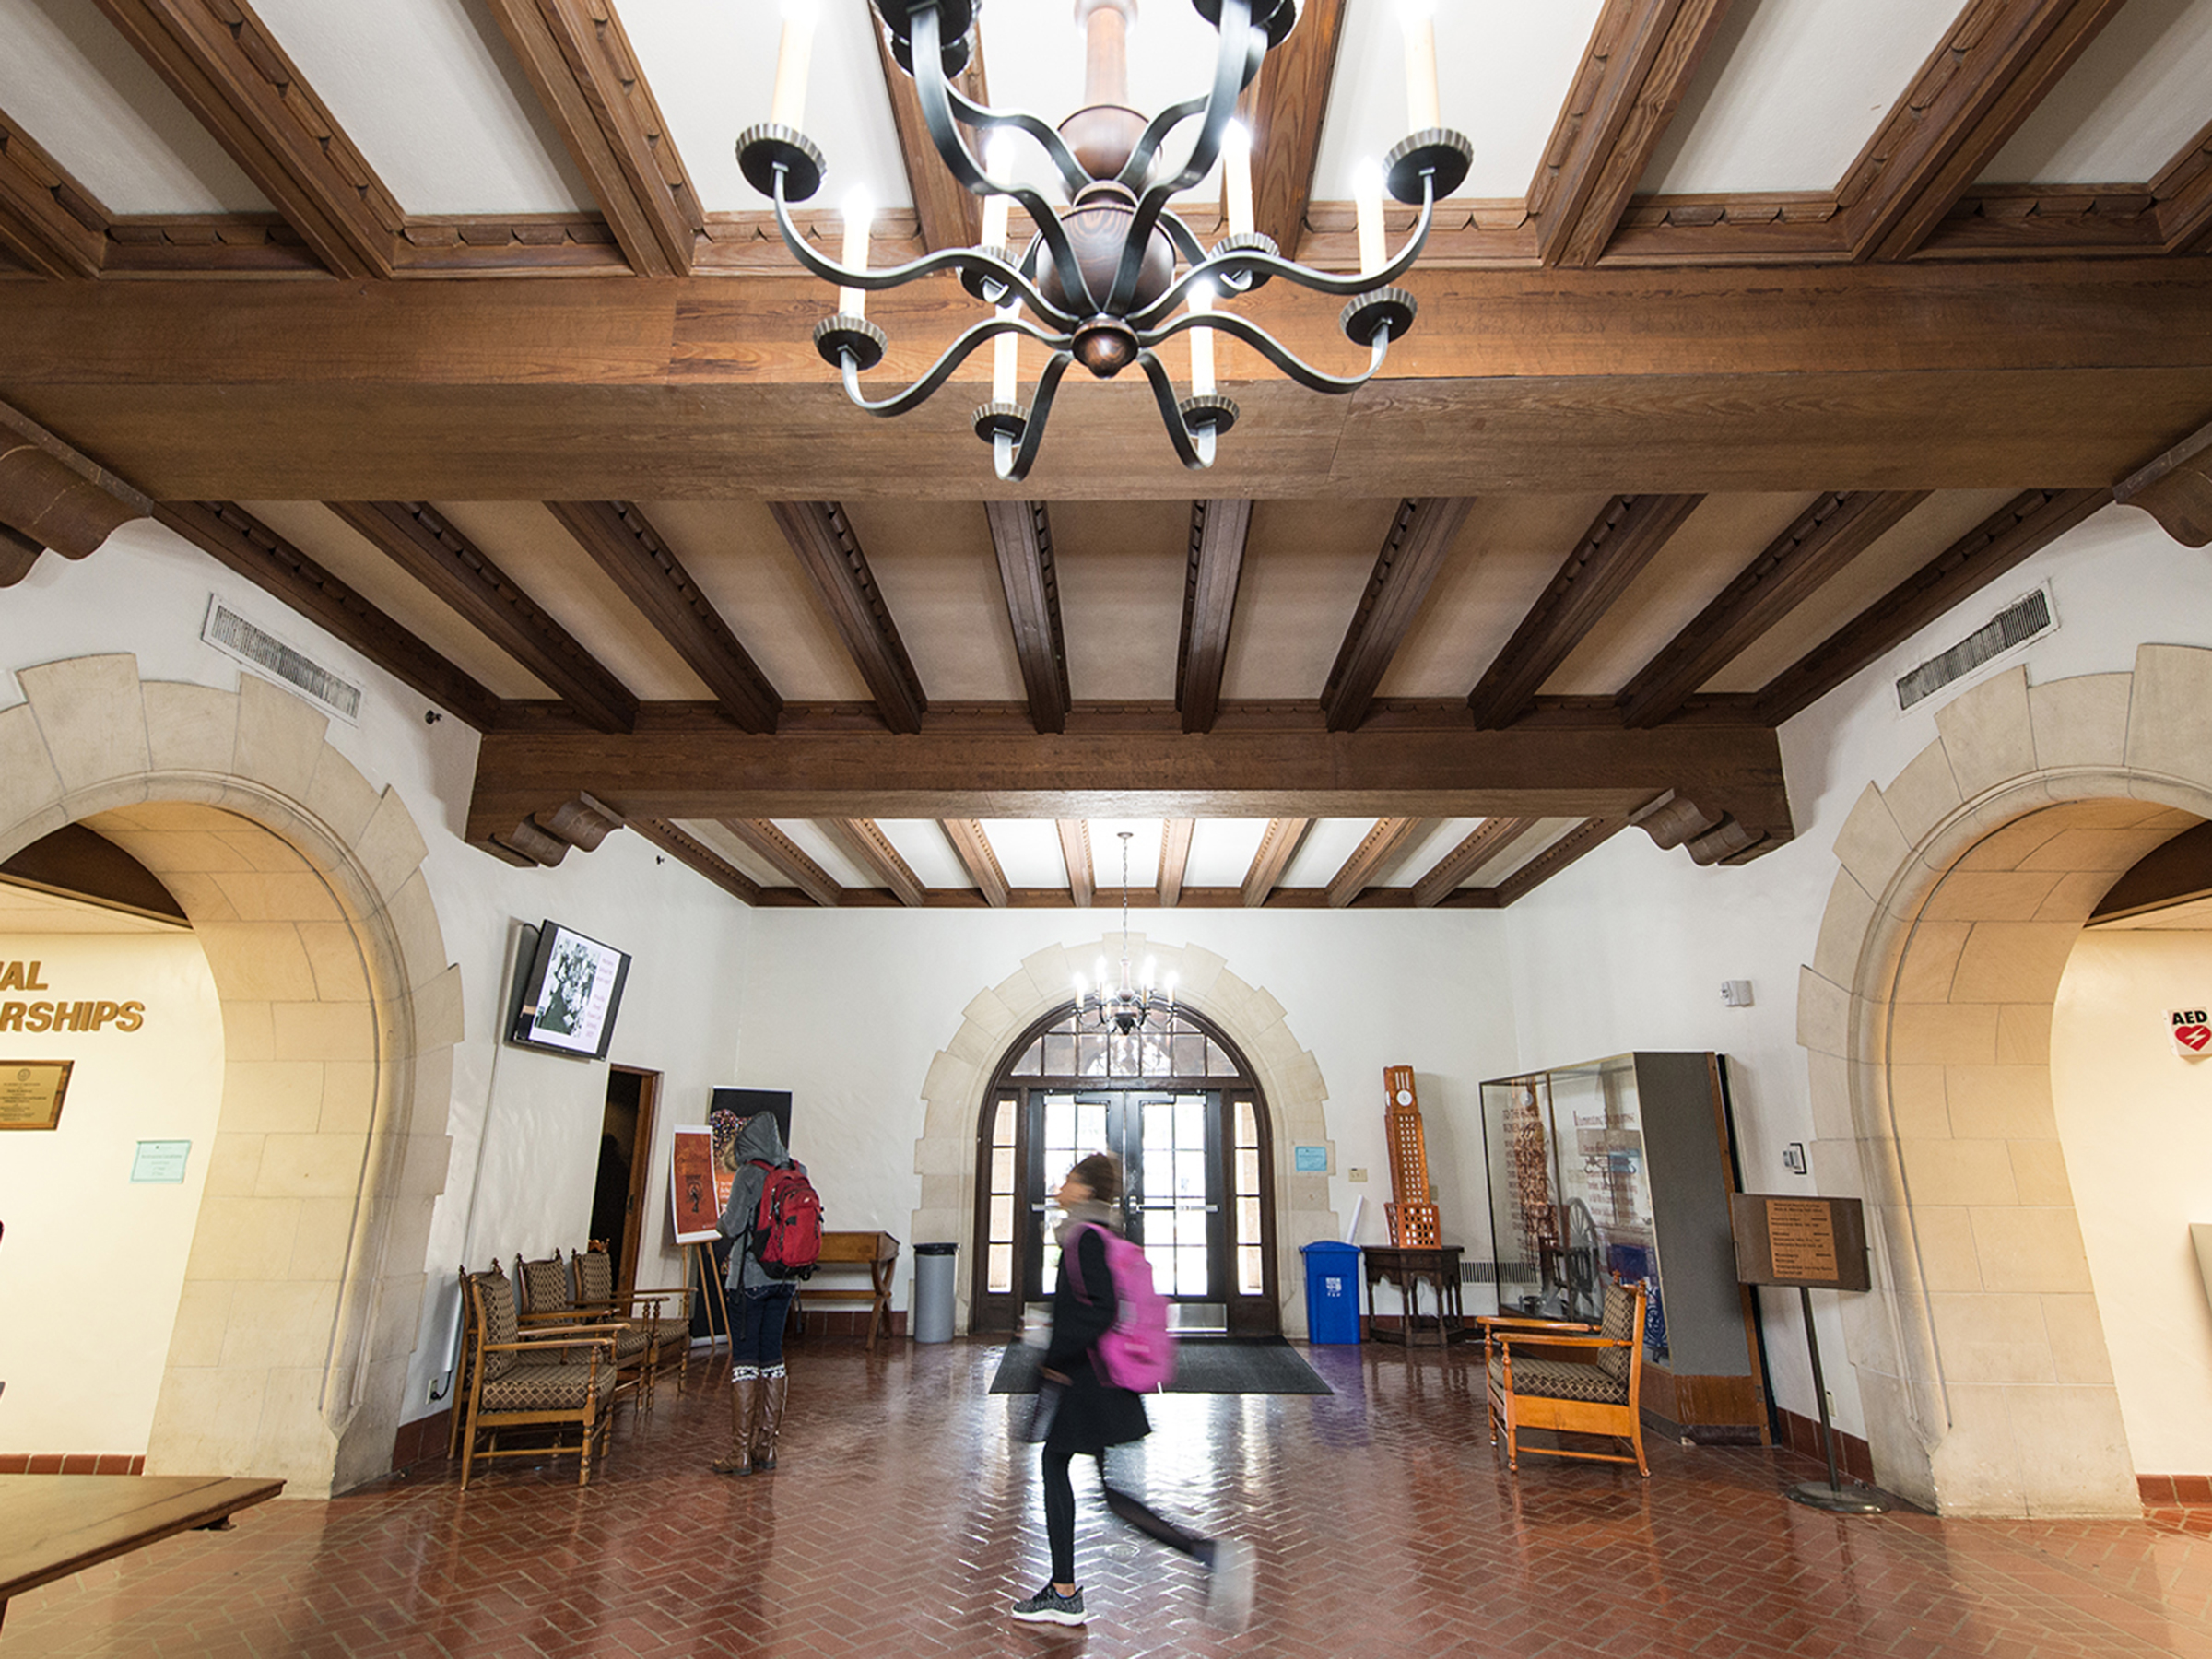 Photo of main hallway in the historic Gearing Hall. An antique chandelier frames the top amongst vaulted ceilings; below a student walks between two arched, cased-opening doorways.  